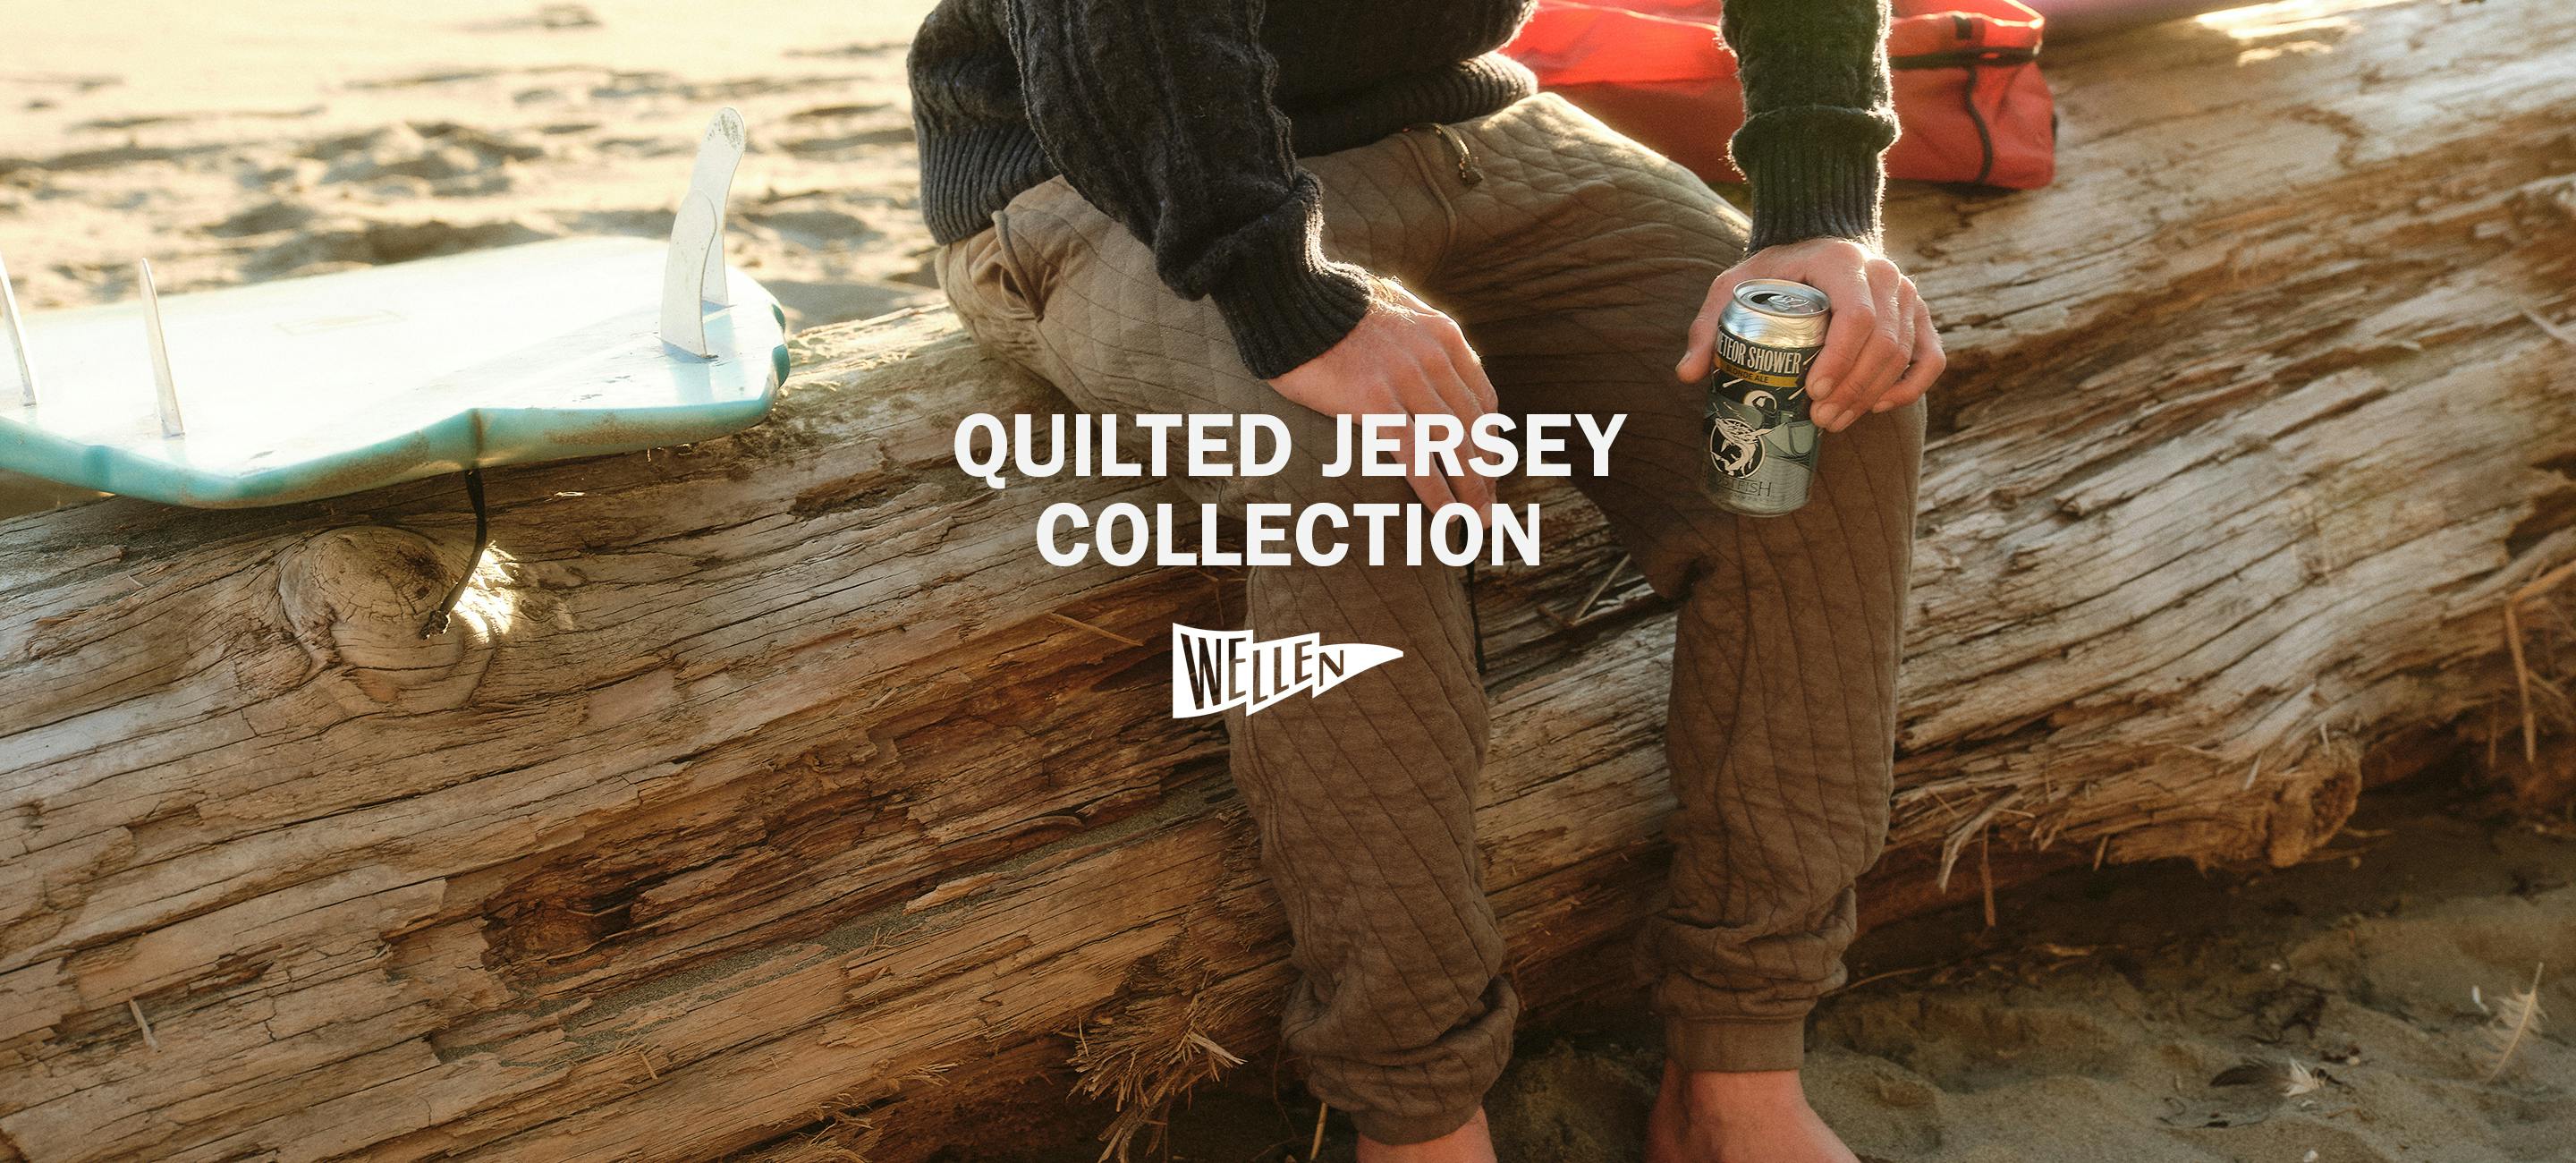 Quilted Jersey Collection